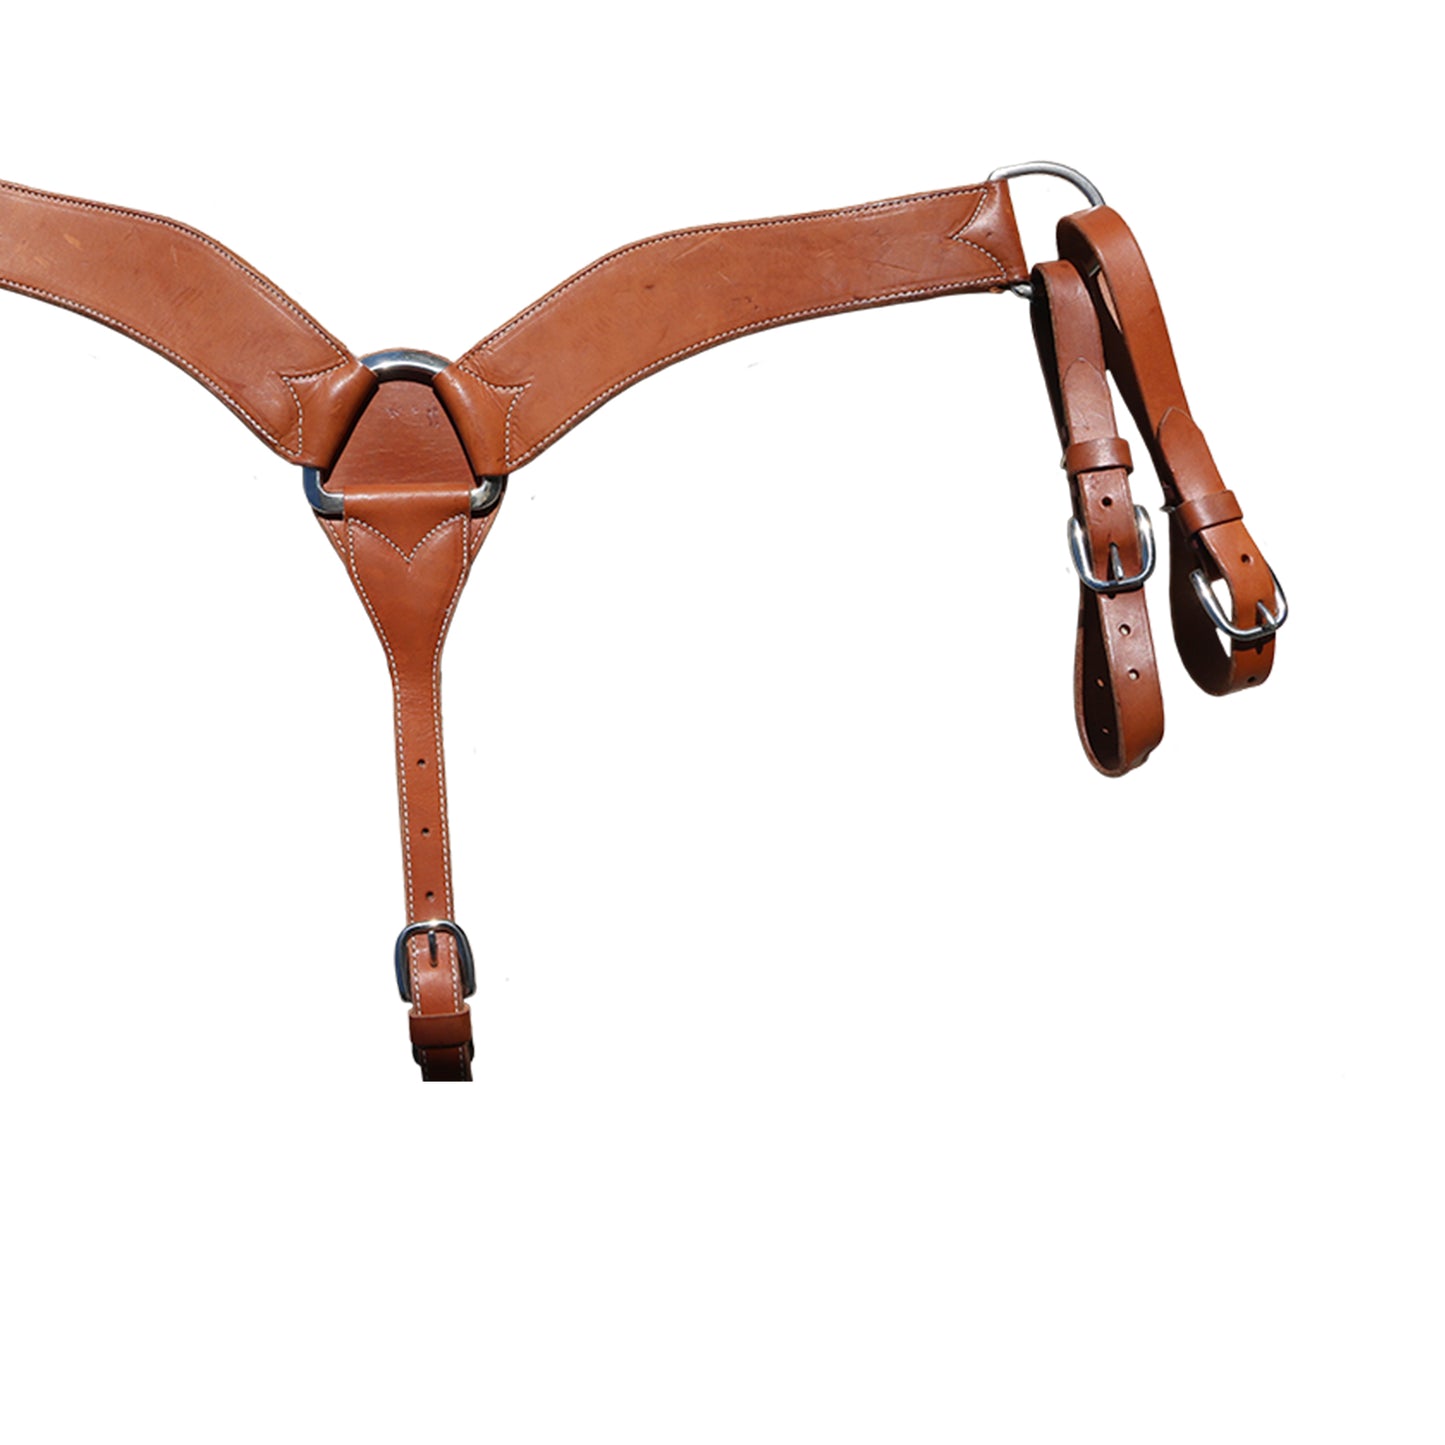 2-3/4" Elite breast collar harness leather with double tugs.